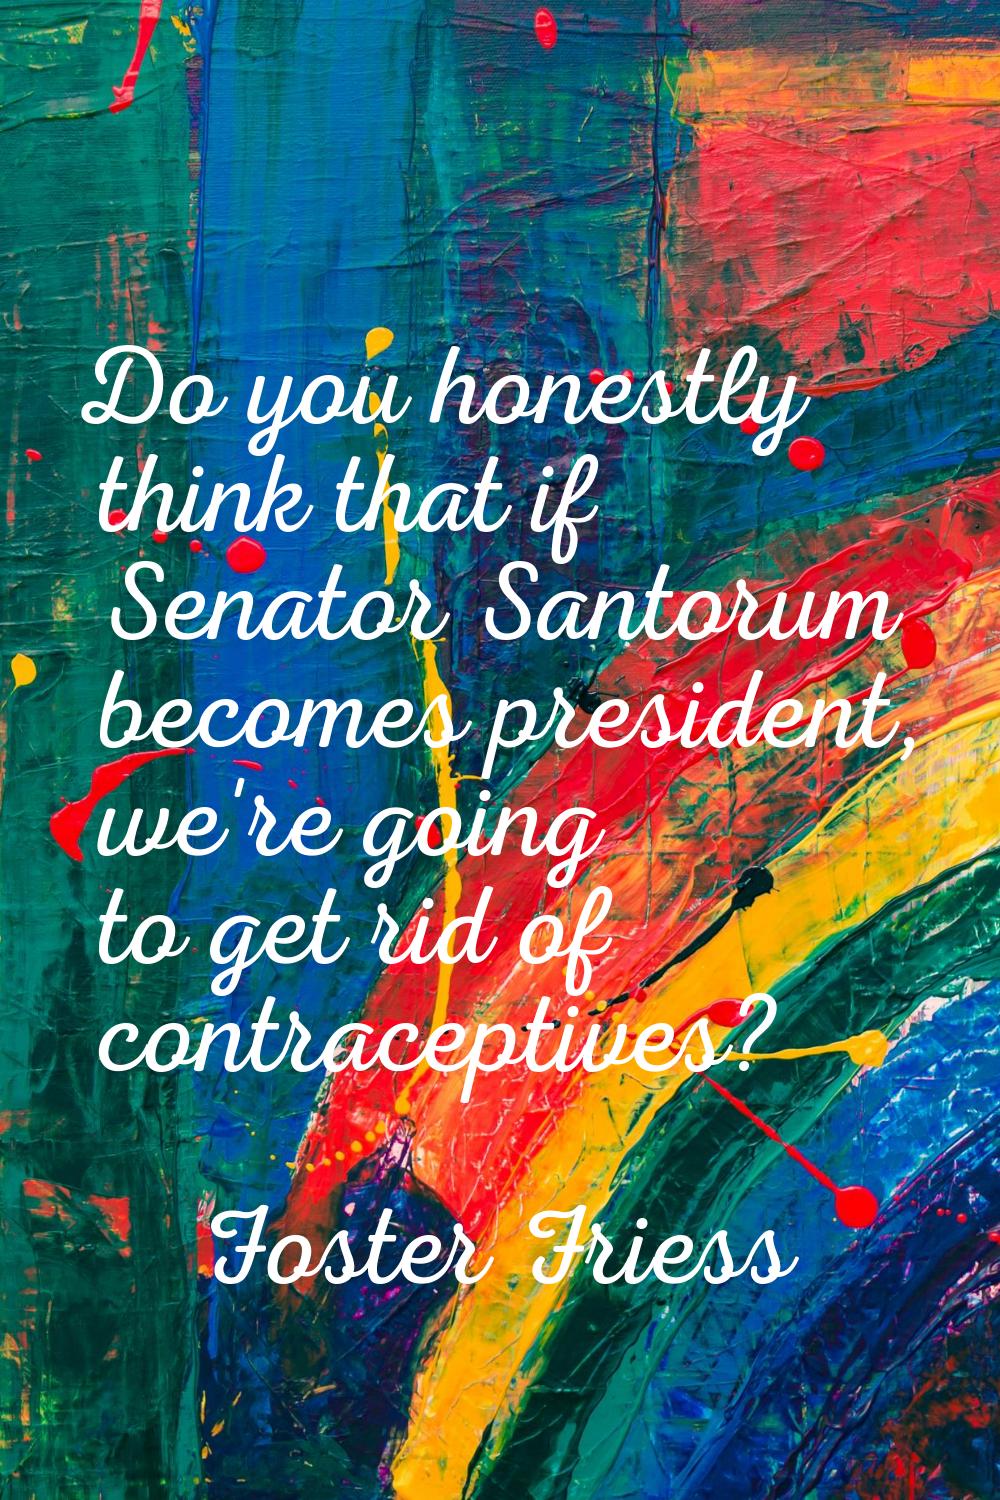 Do you honestly think that if Senator Santorum becomes president, we're going to get rid of contrac